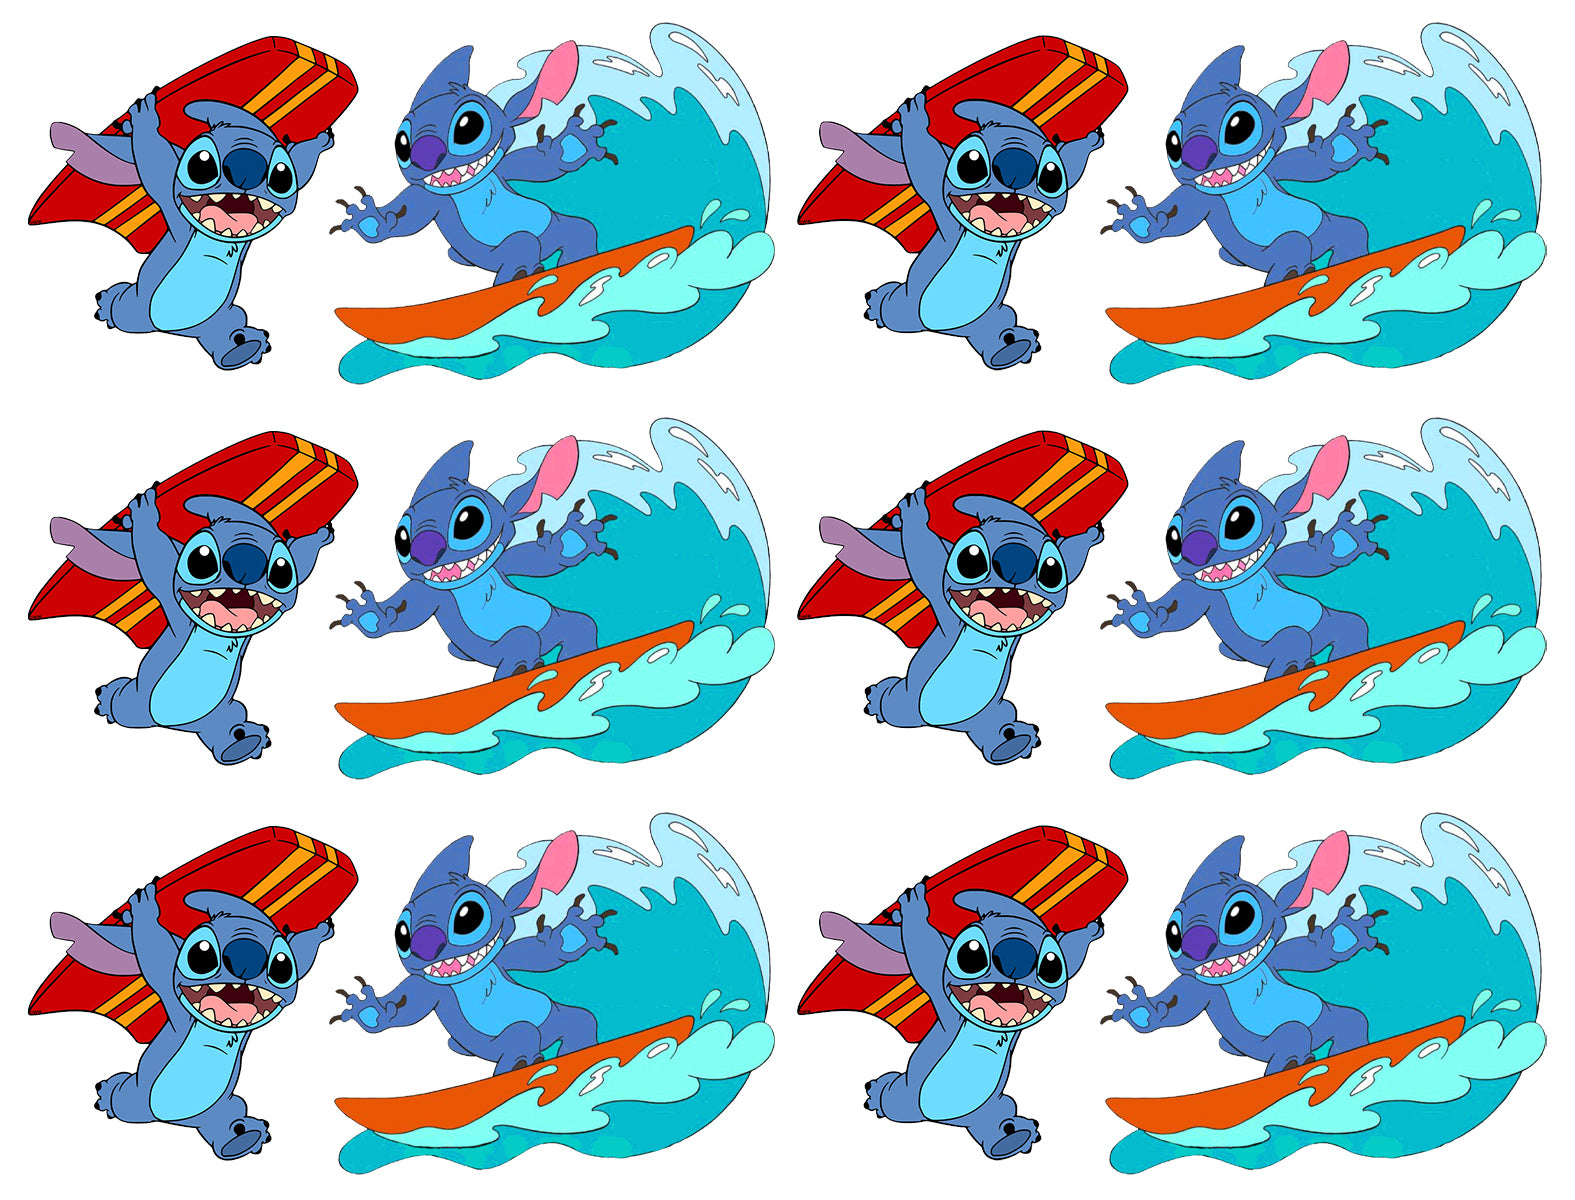 Lilo and Stitch Stitch Surfing Edible Cake Topper Image Strips ABPID56814